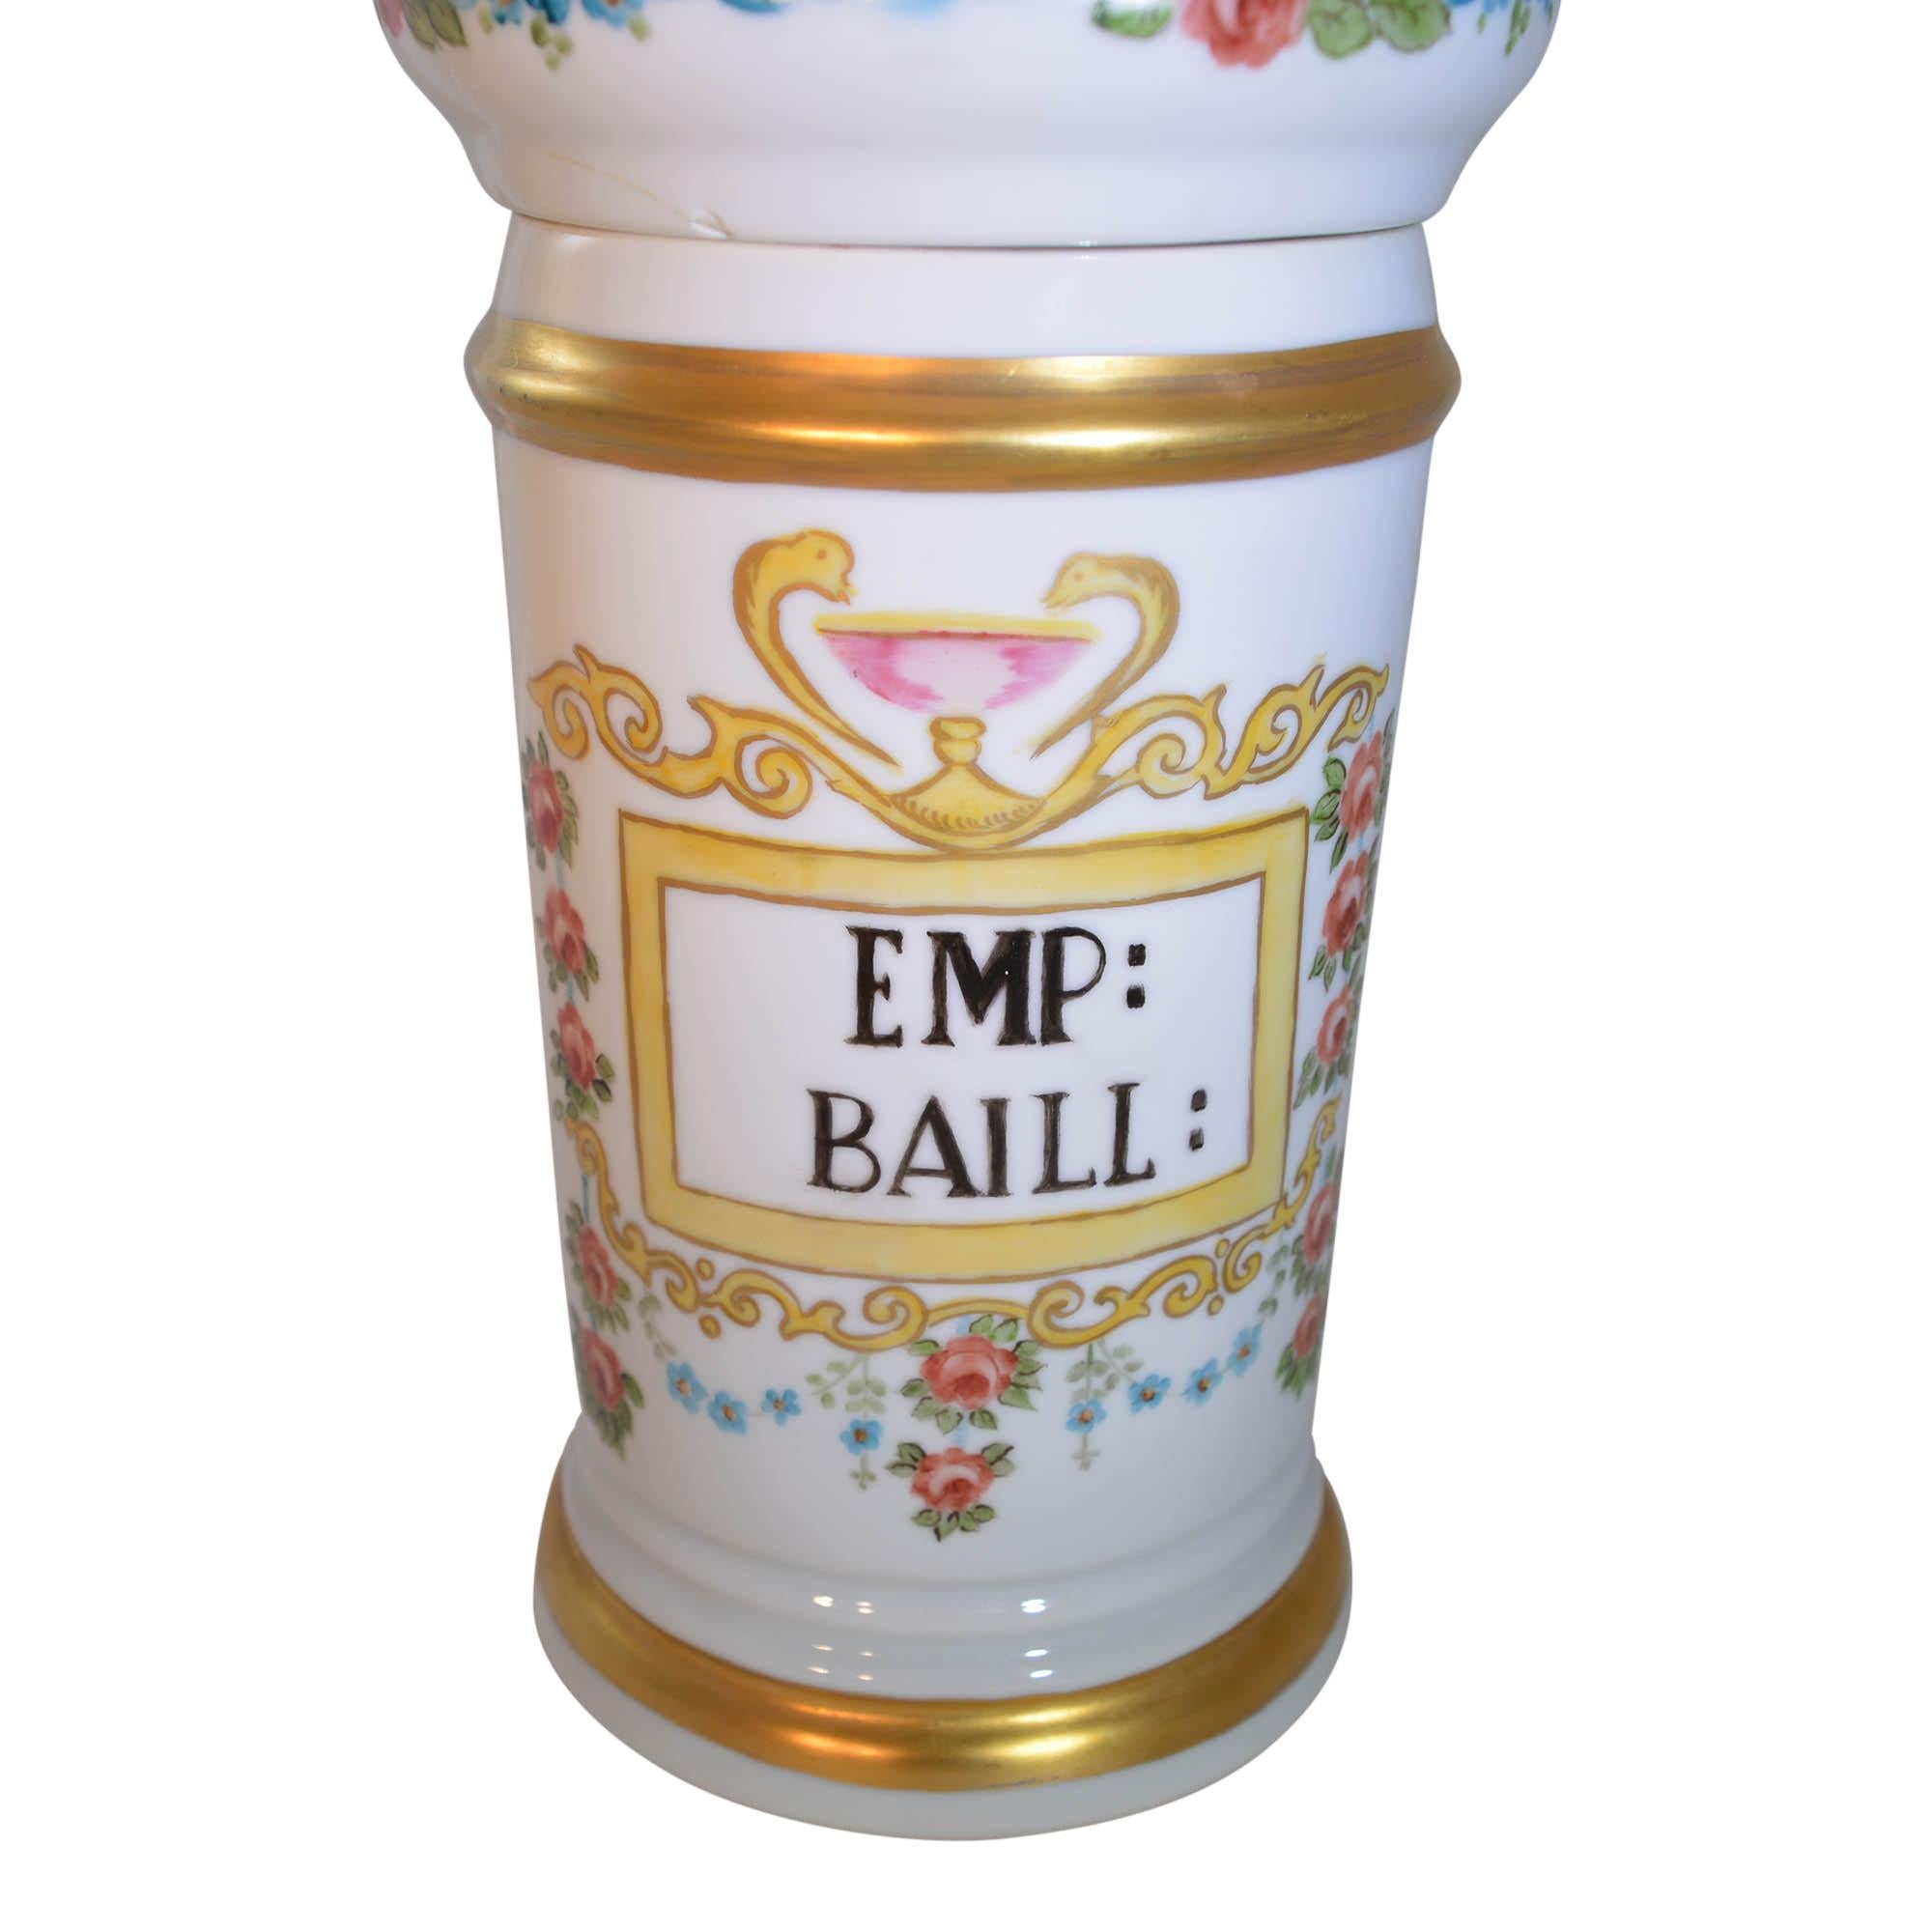 The porcelain jar has hand painted decor, features words - EMP: BAILL:
The apothecary jar has additional accents of gilt accent on the top and bottom rim, as well as around the knob on the lid. The lid has a floral design around the side. The base